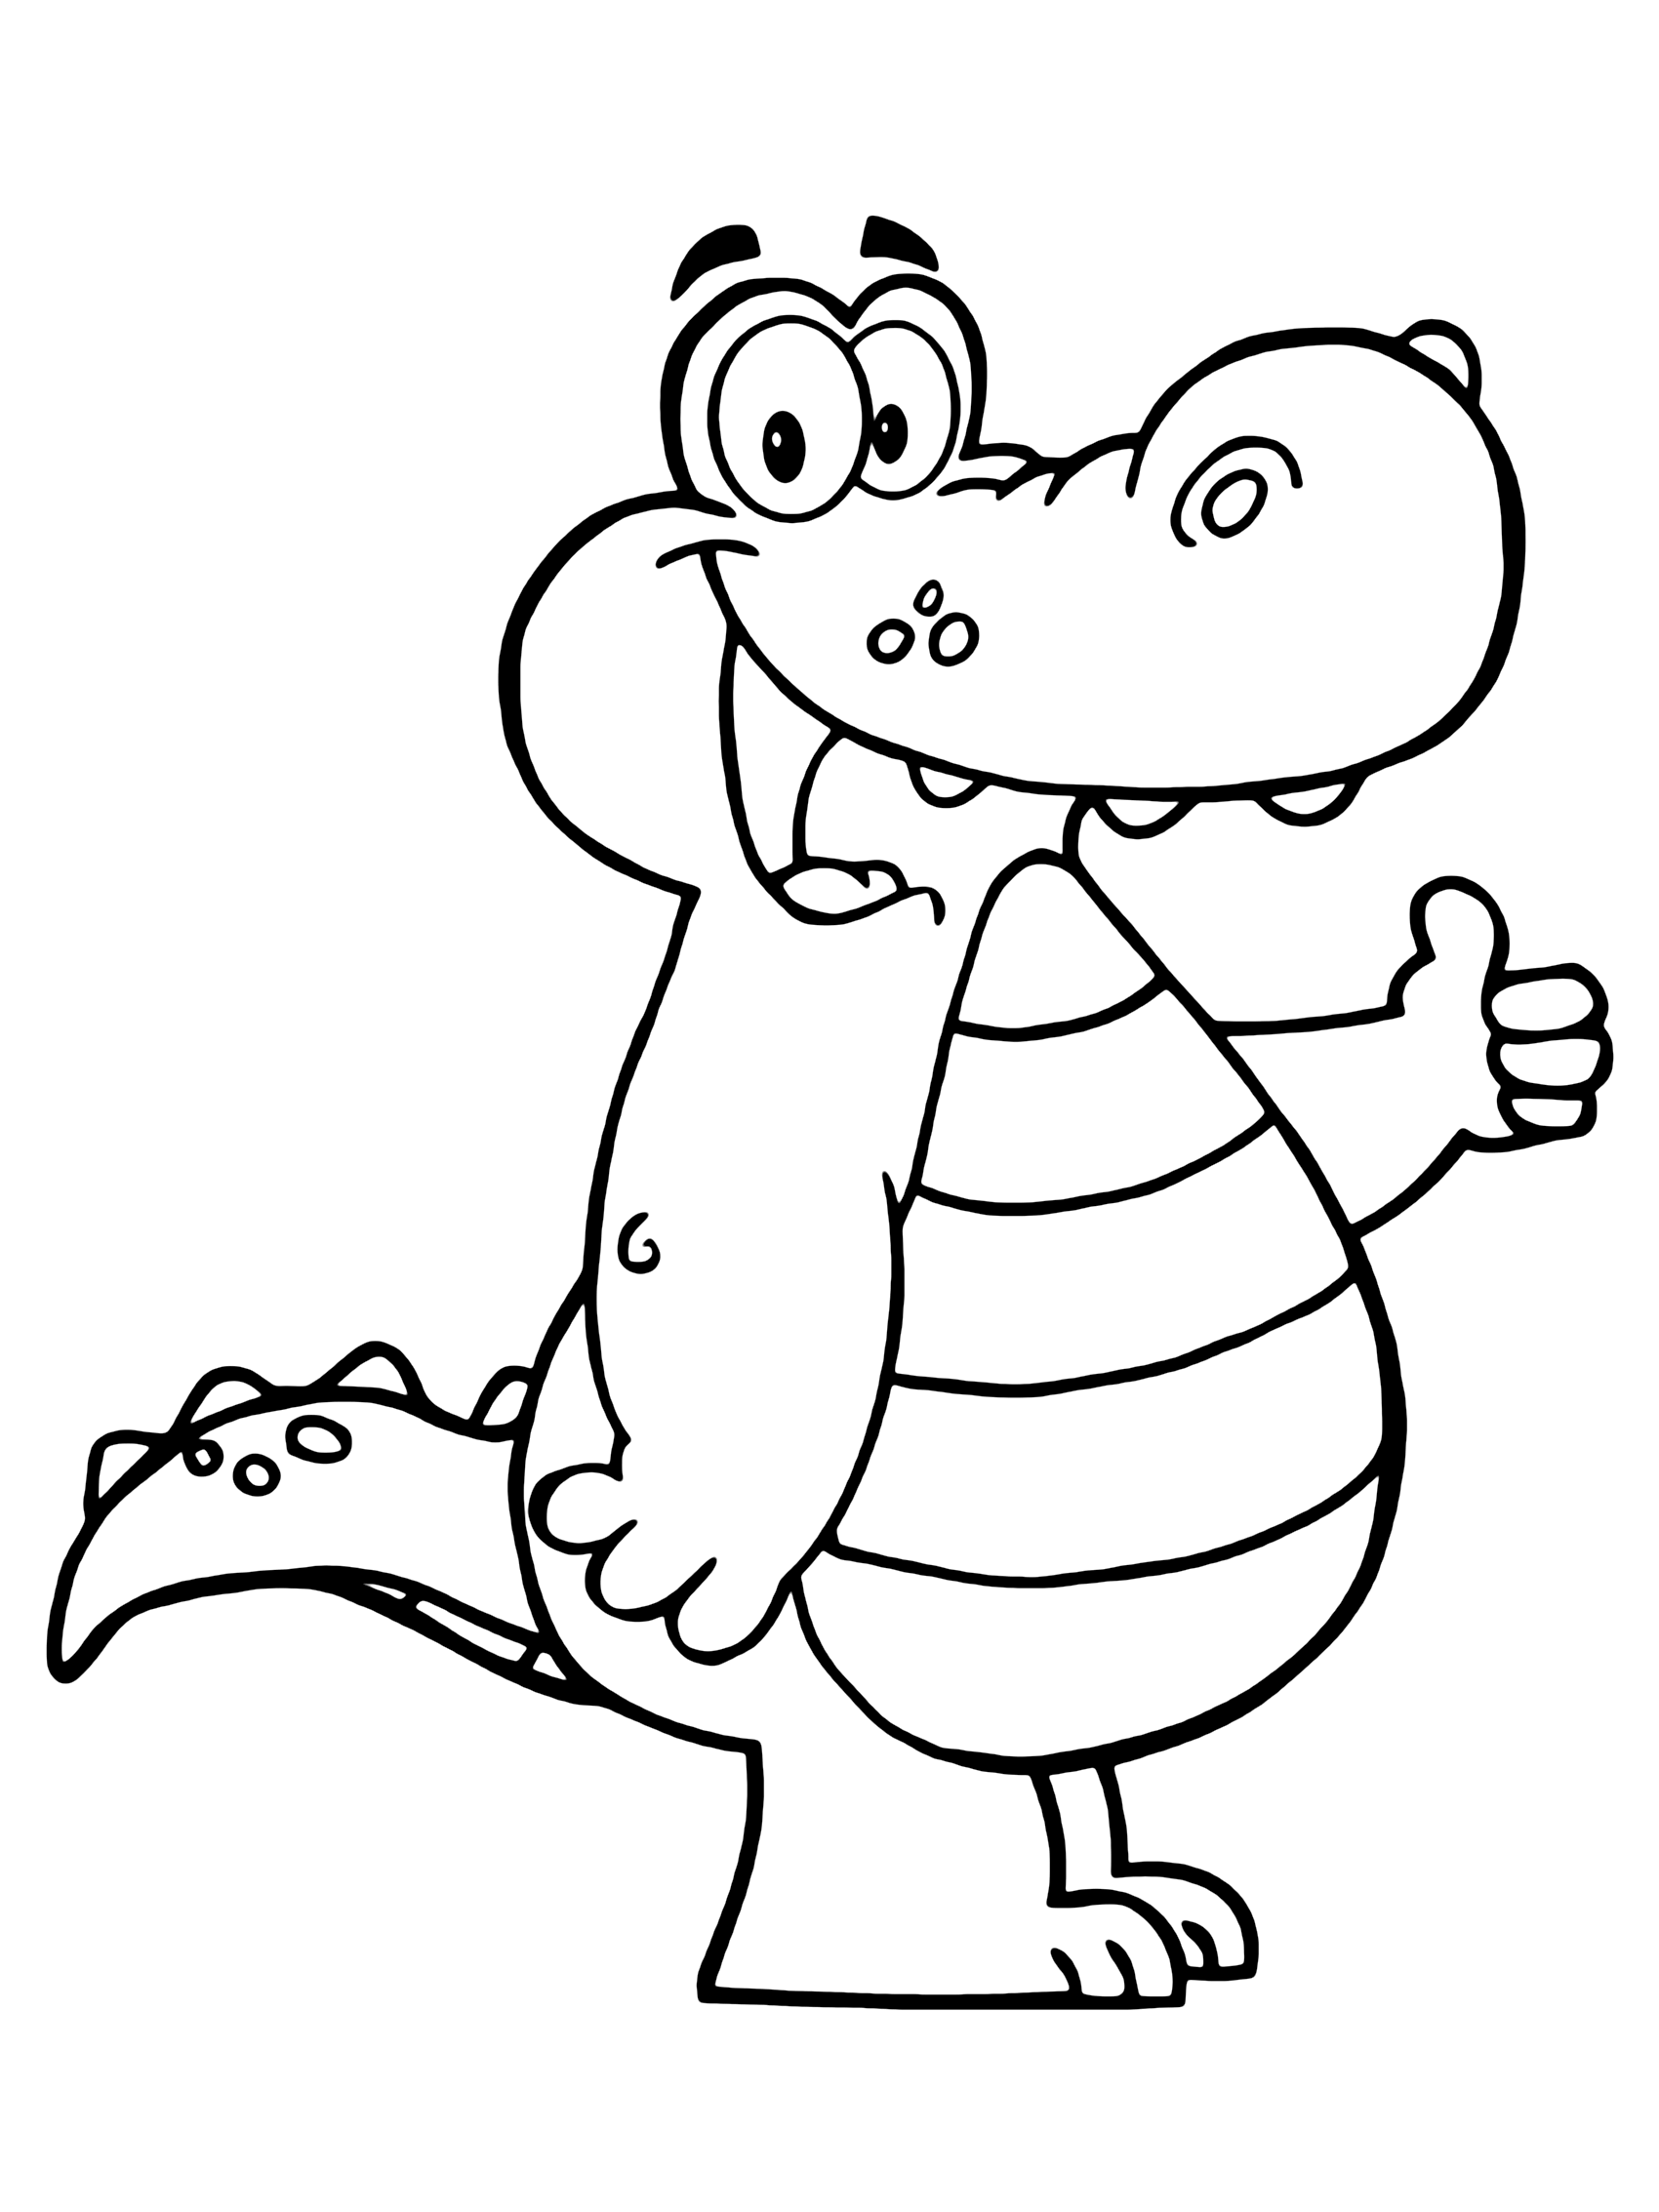 Cute Alligator Coloring Page for Kids